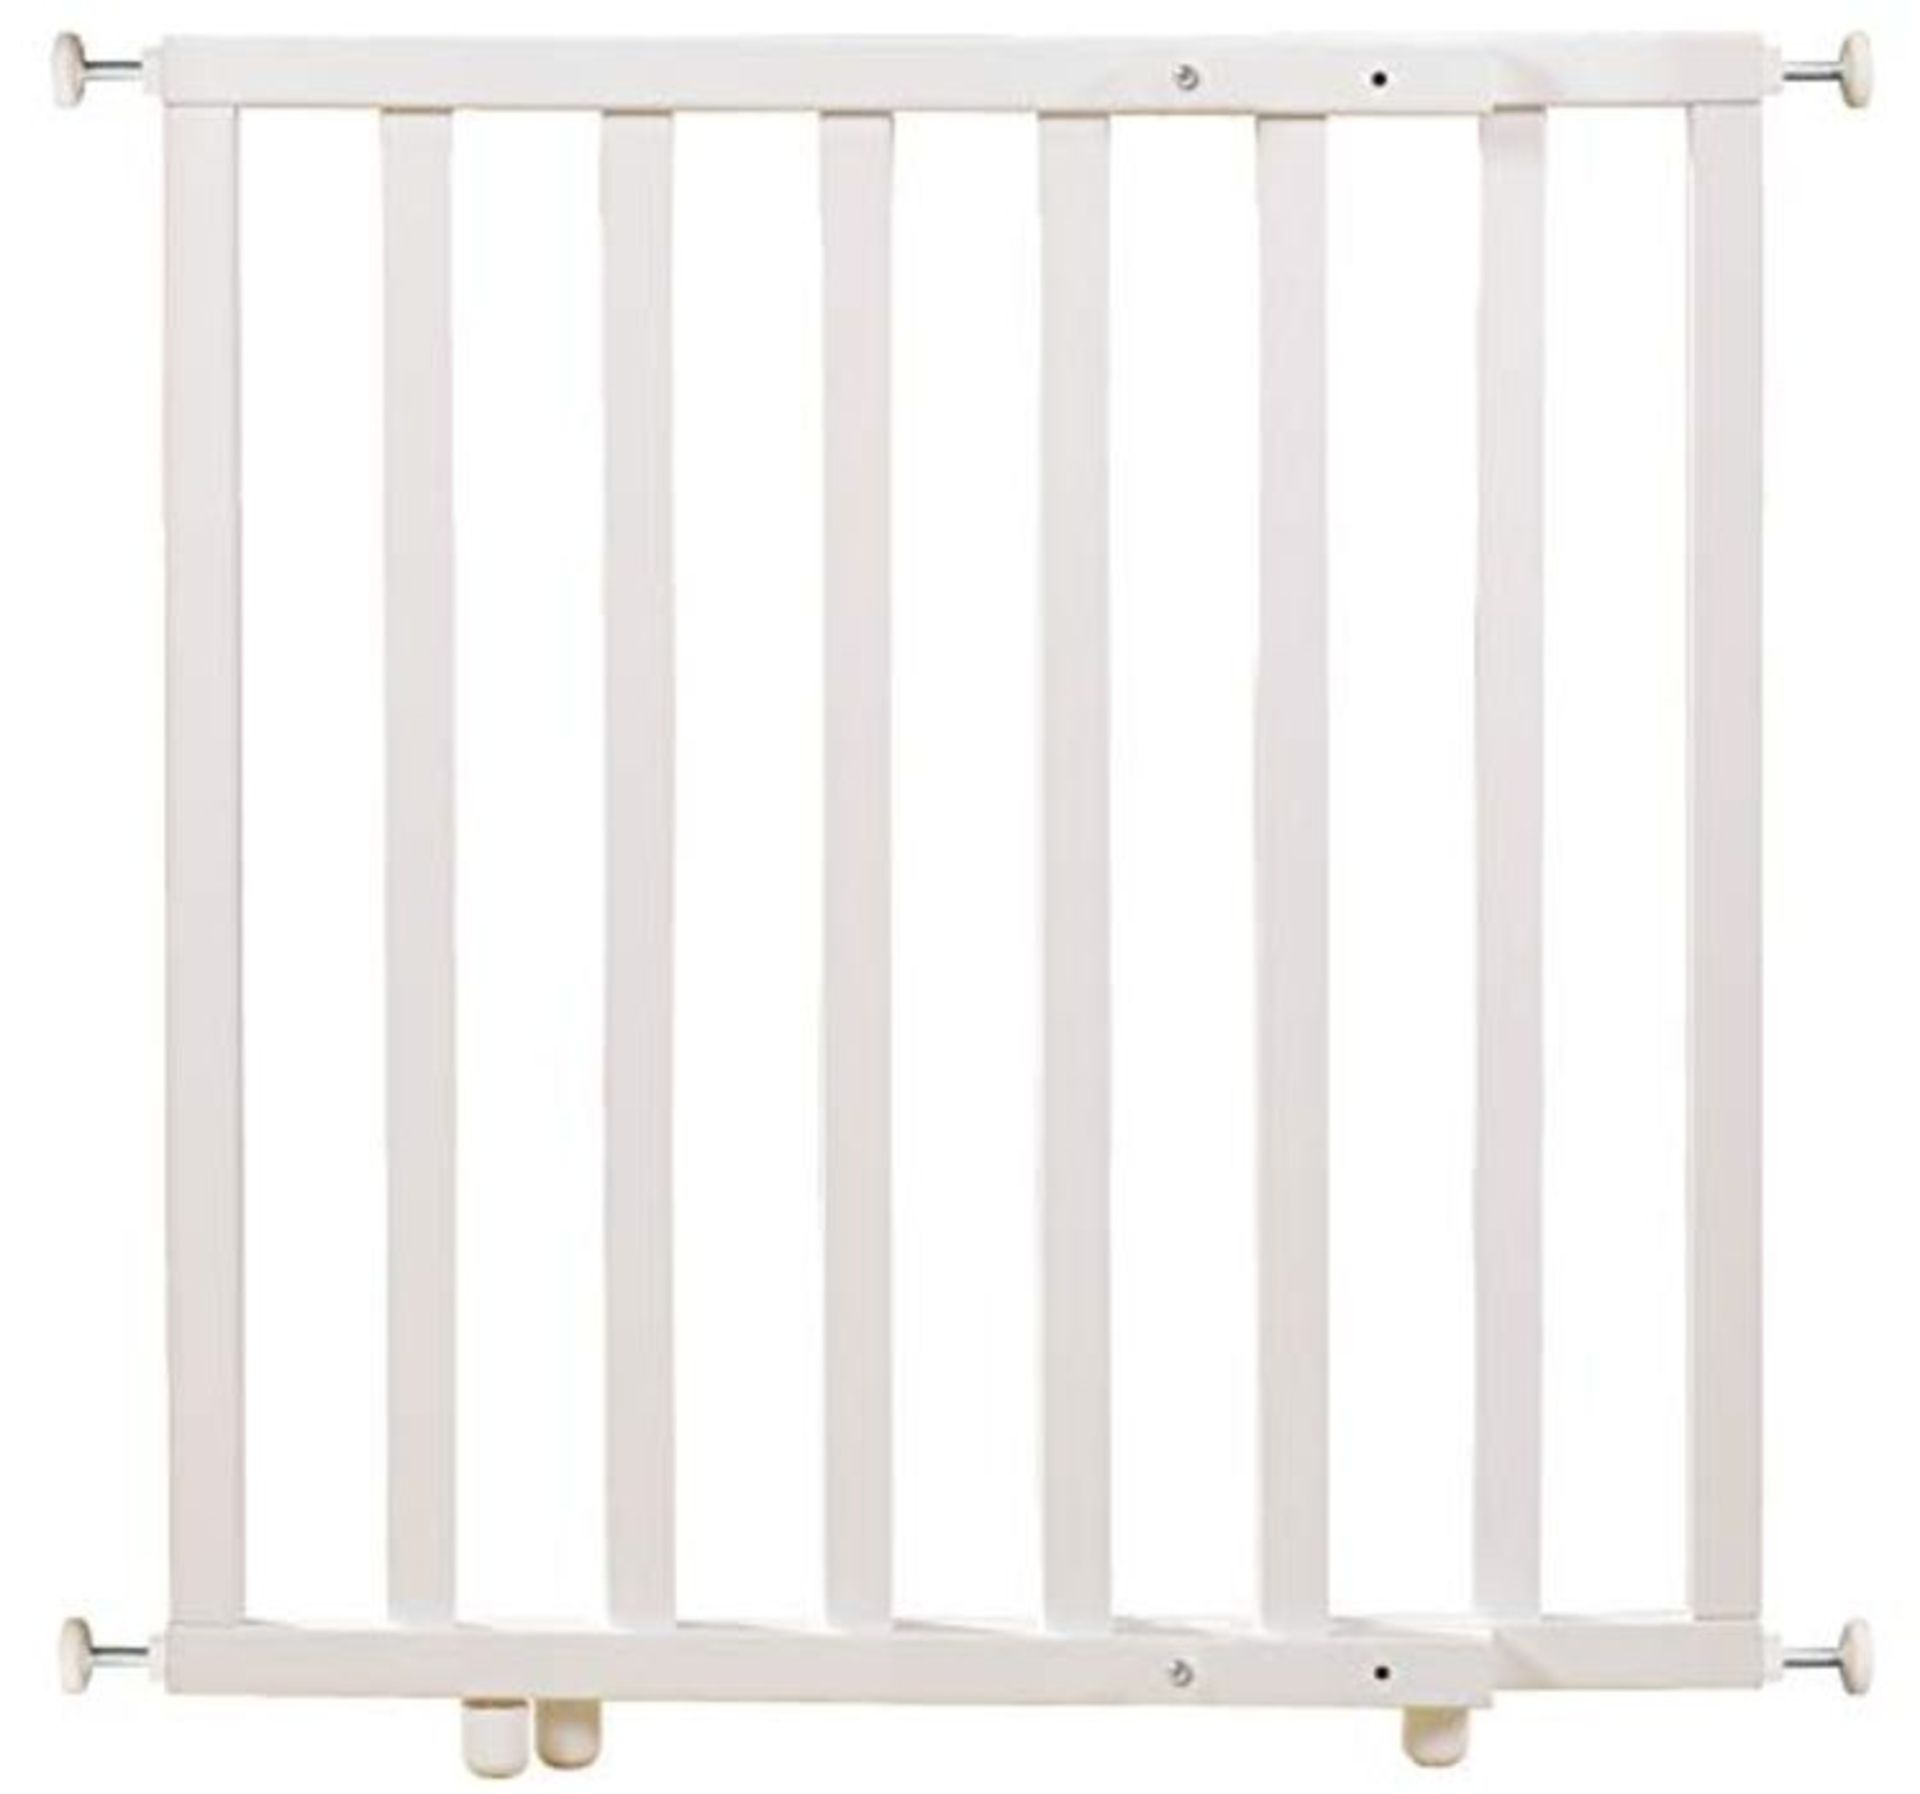 roba Clip-on safety gate, white, width 62-105 cm, stair gate for children and pets.